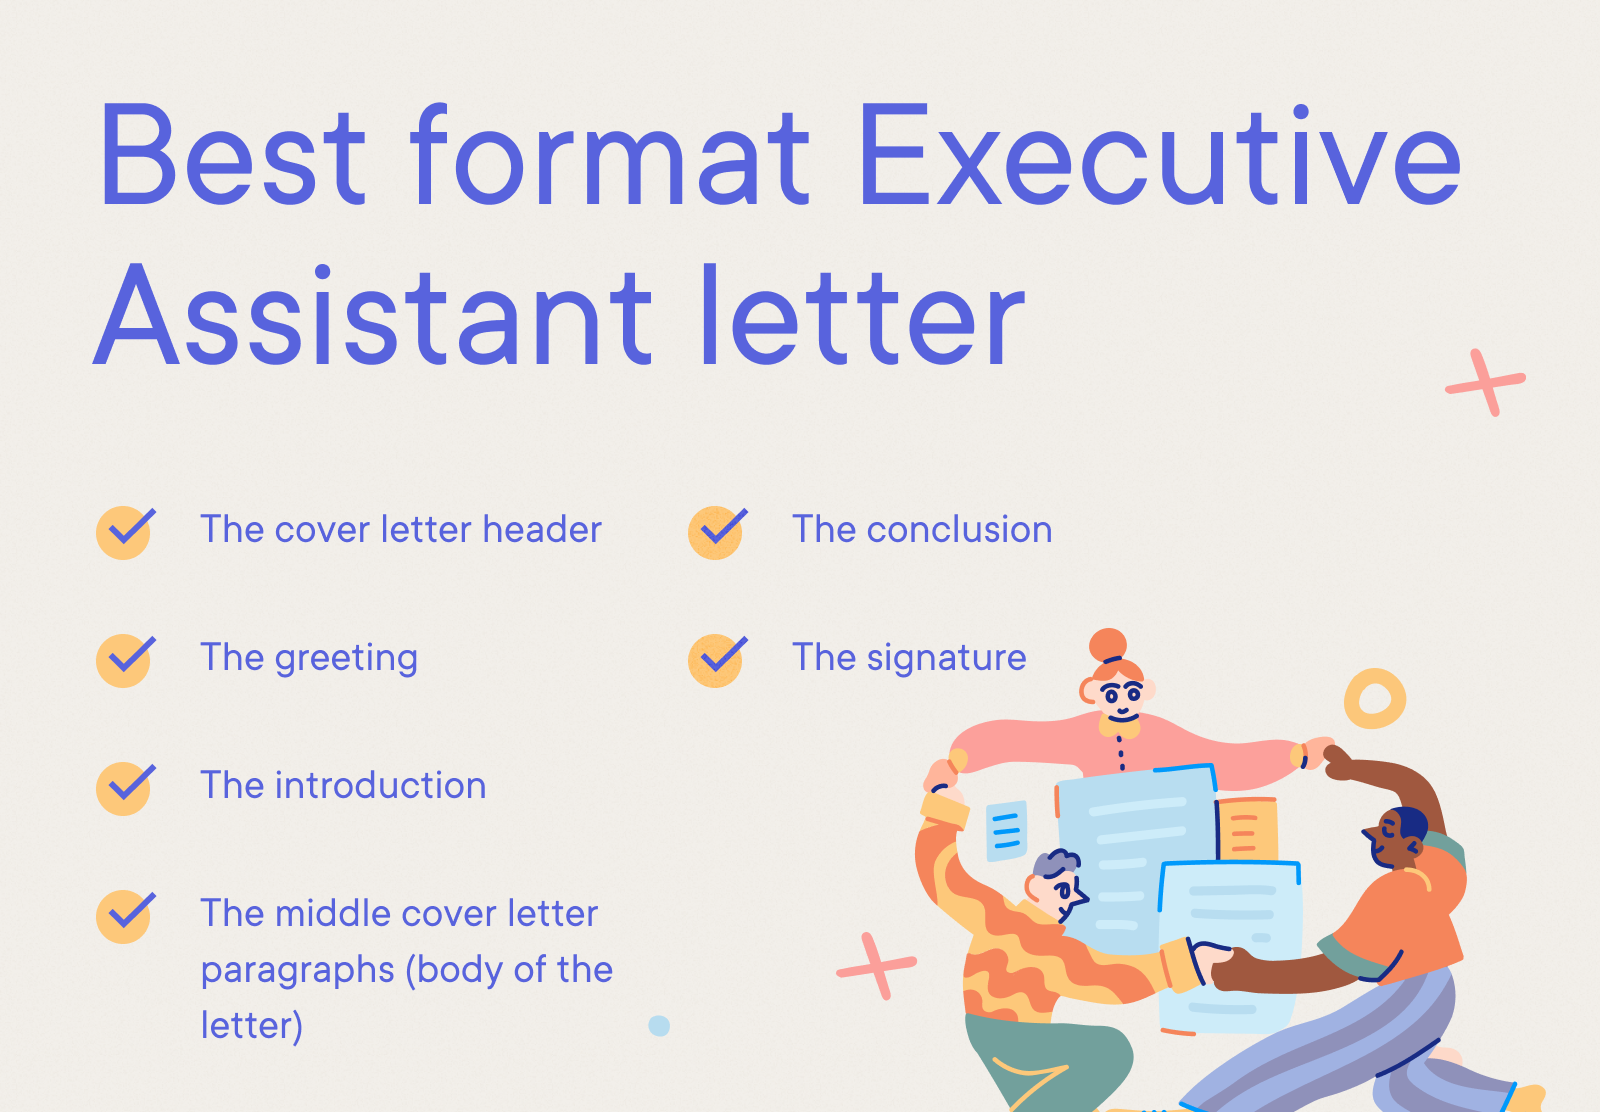 Executive Assistant Cover Letter Example - Best format Executive Assistant letter